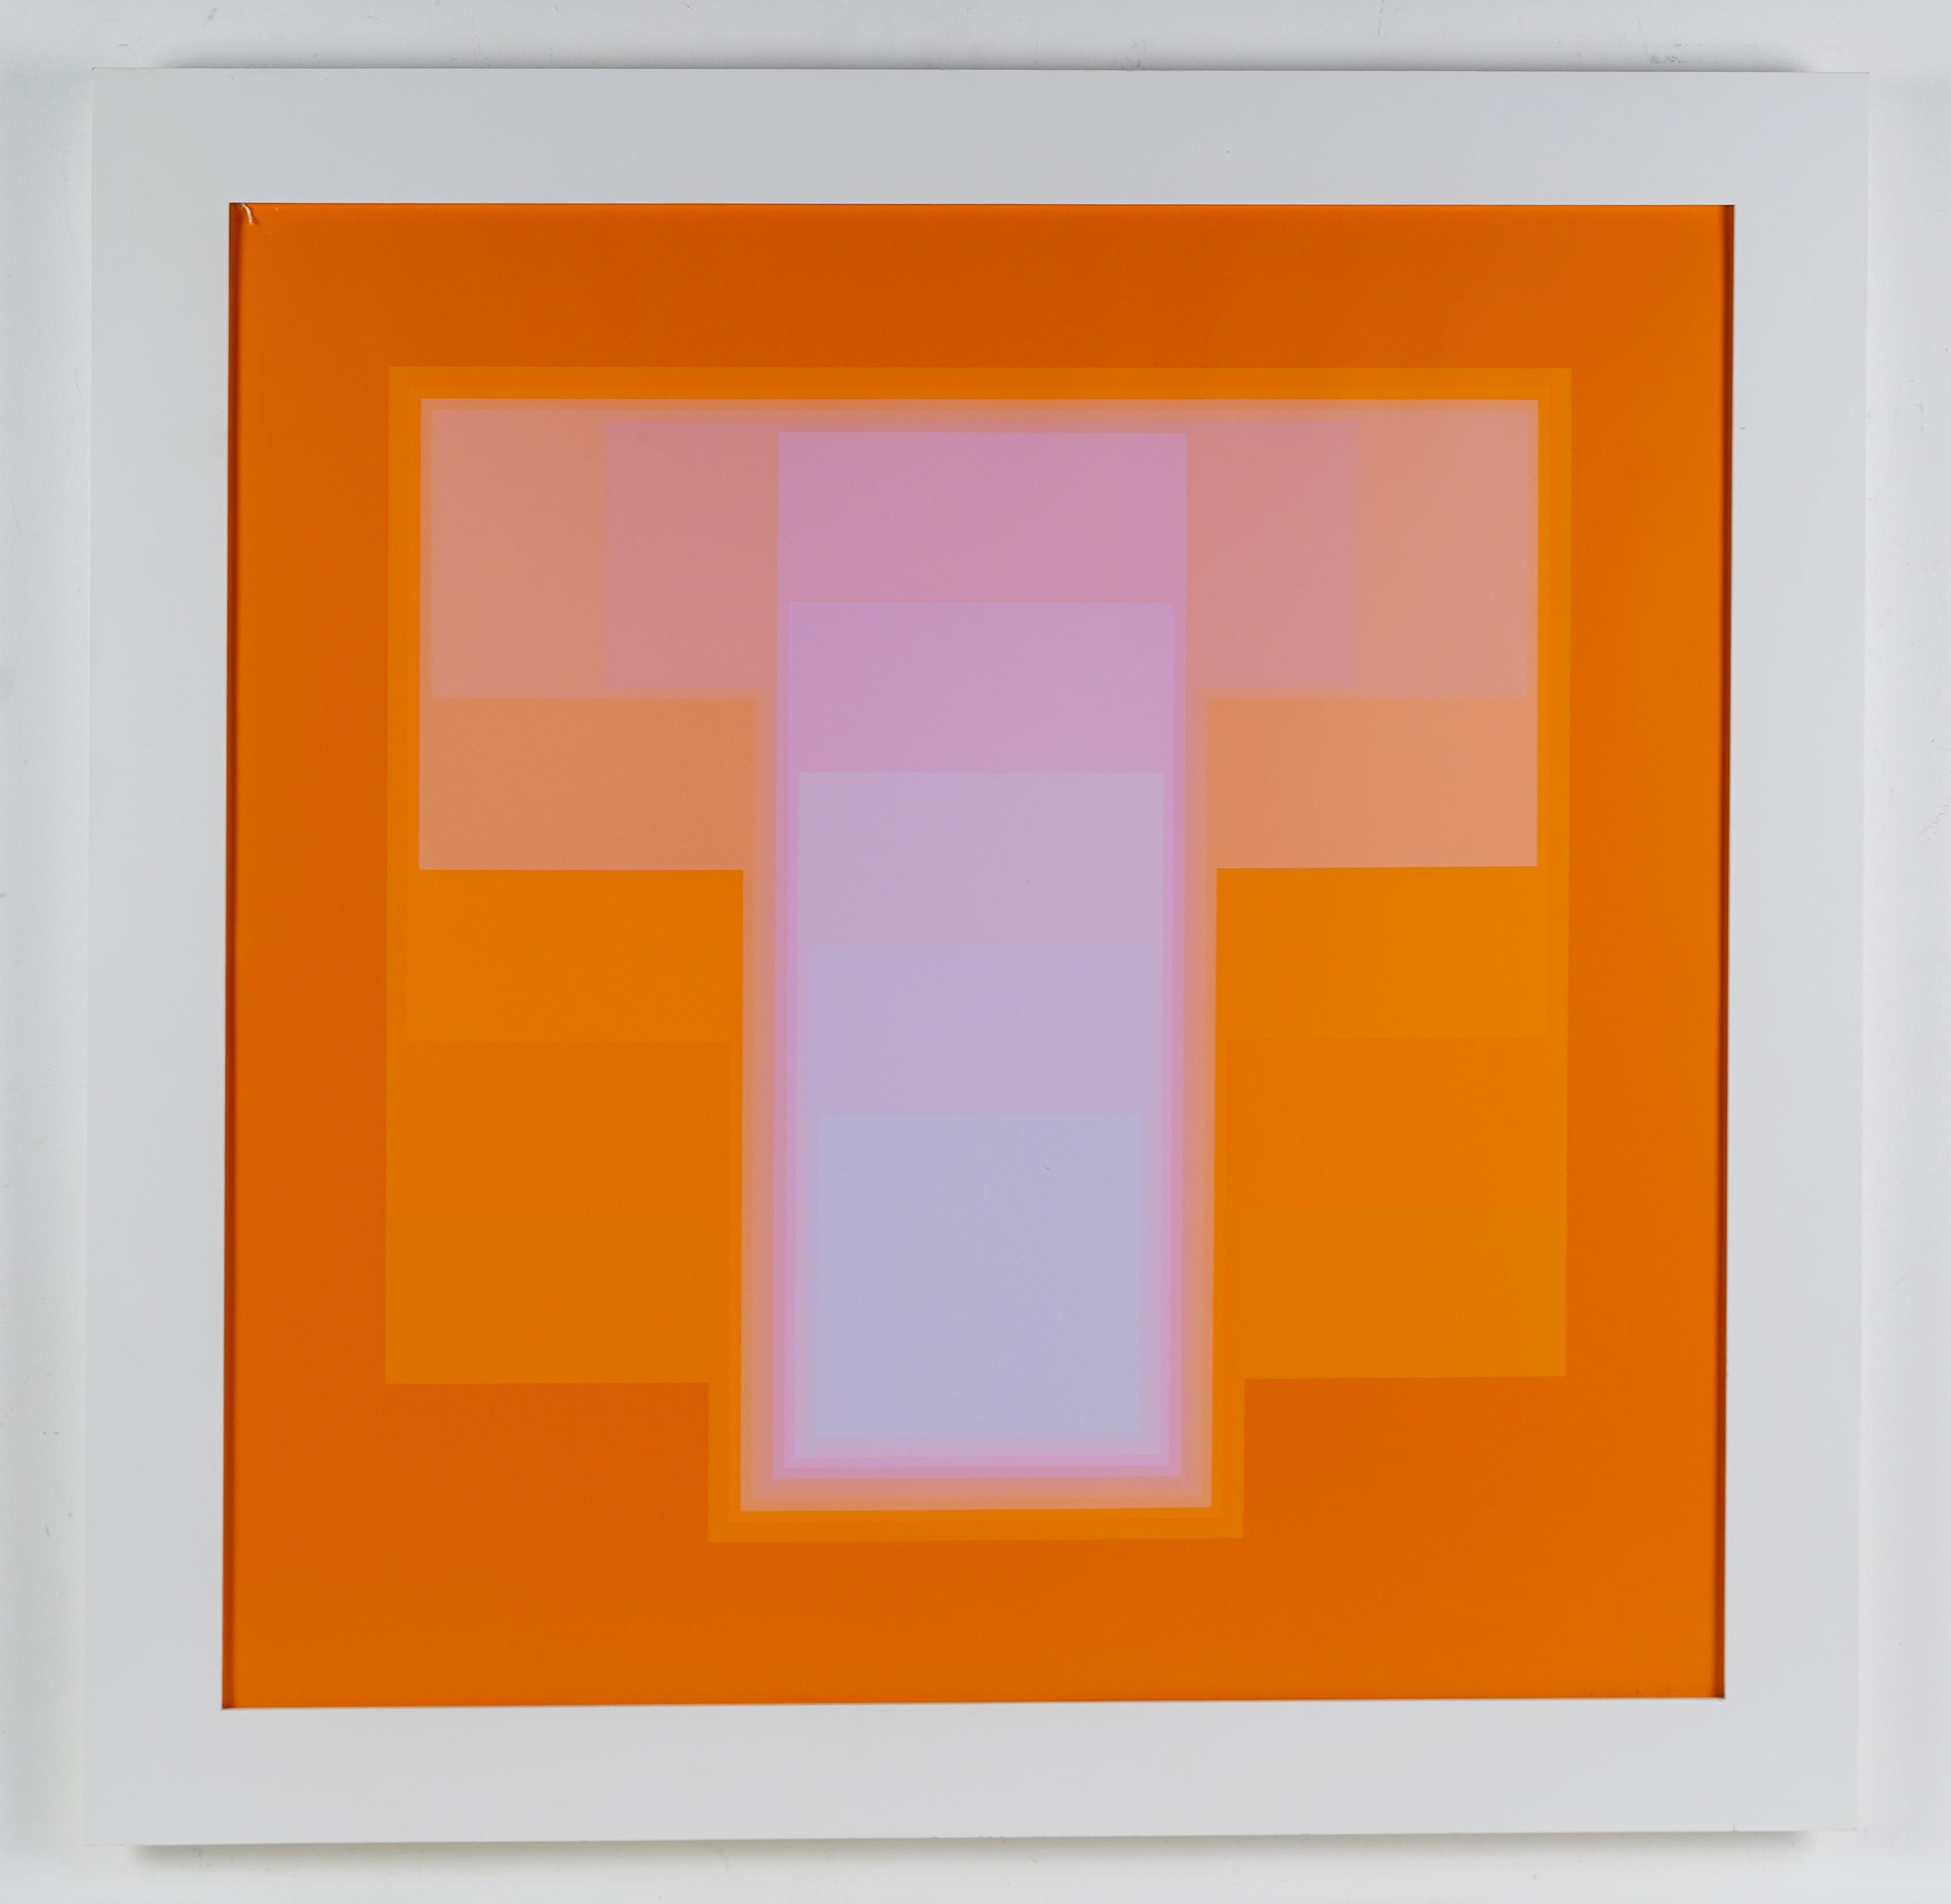 Vintage Swiss Modern serigraph by Karl Gerstner (1930/37 - 2017). Serigraph on paper, circa 1975.  Housed in a period modernist frame.   Image size, 31.5L x 31.5H. 
